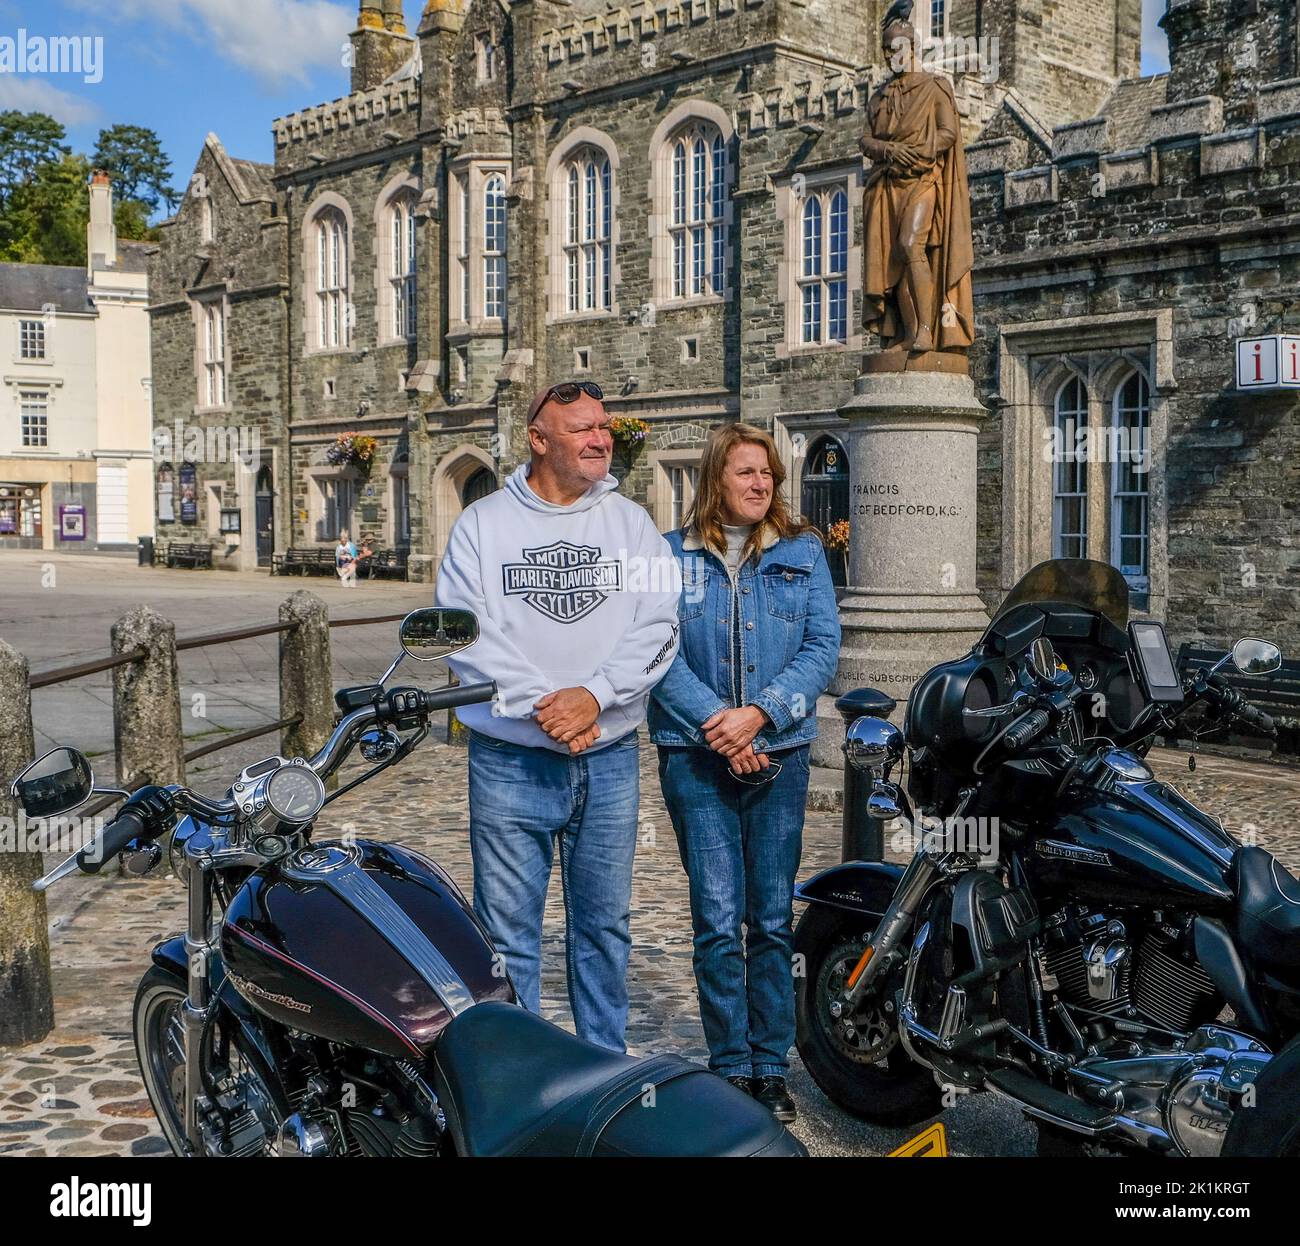 Devon, UK. 19th Sep, 2022. Two minutes silence for HRH Queen Elizabeth II, Tavistock  Devon UK. Two Harley Davidson Bikers show their respect and stand for 2 minutes silence next to their Harley Davidson Motor Cycles.in Tavistock Devon. In the background is a statue of Sir Francis Drake, famous son of Tavistock. Credit: charlie bryan/Alamy Live News Stock Photo